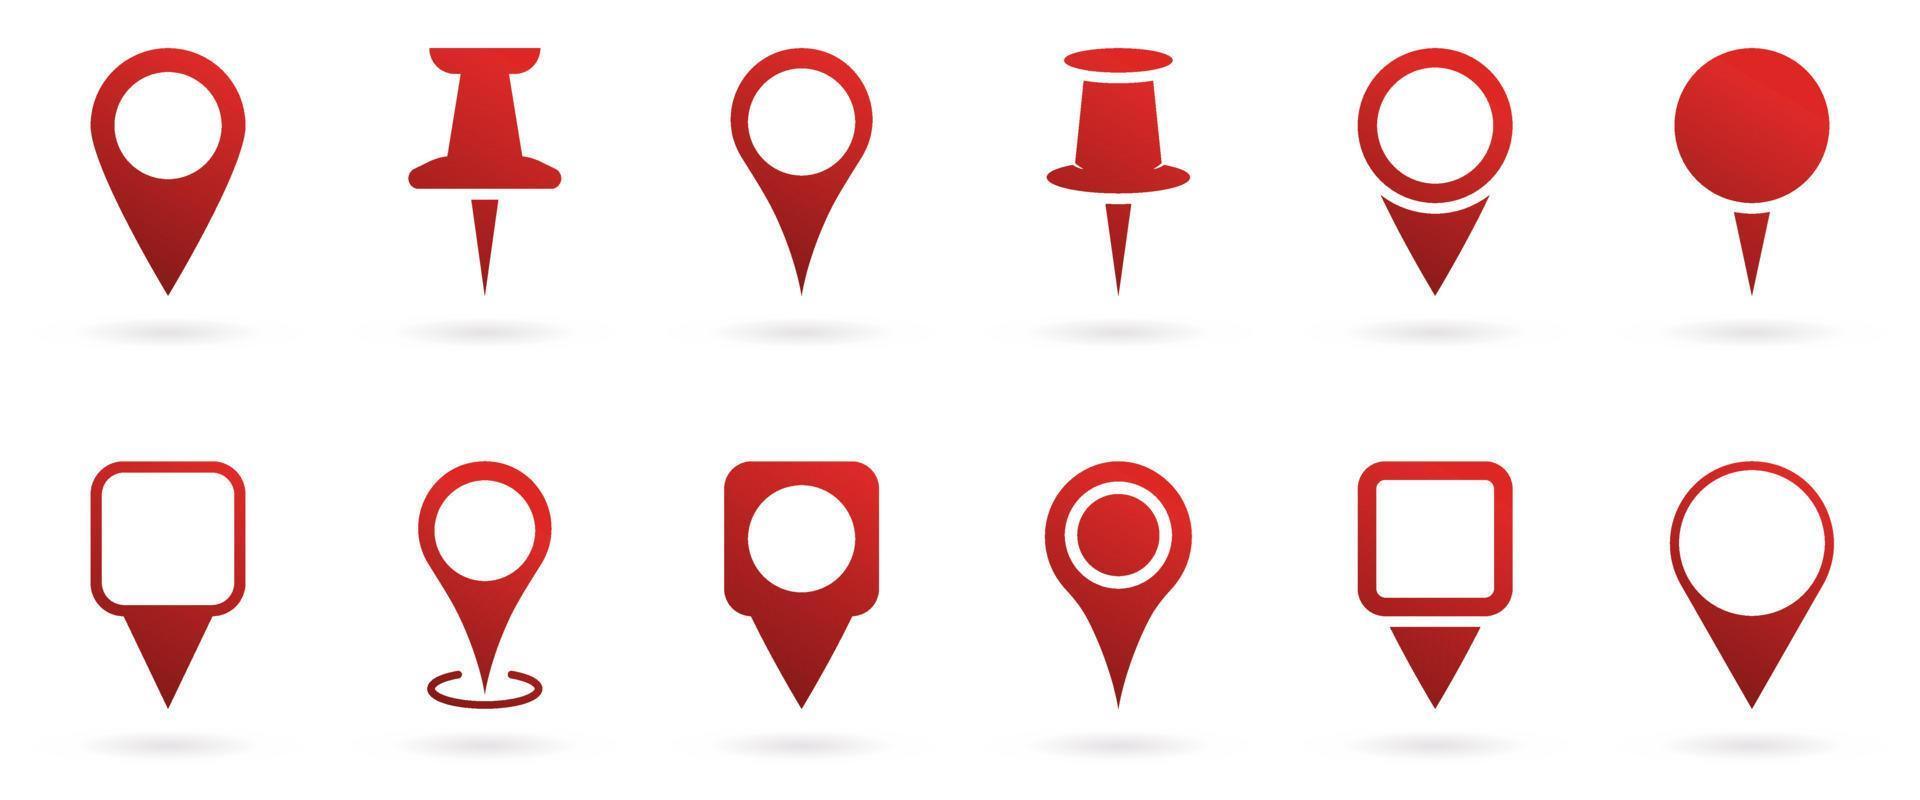 Red Location Pins Sign. Set of Marker Point on Map, Place Location Pictogram. Pointer Navigation Symbol. Red GPS Tag Collection. Thumbtack Sign. Isolated Vector Illustration.